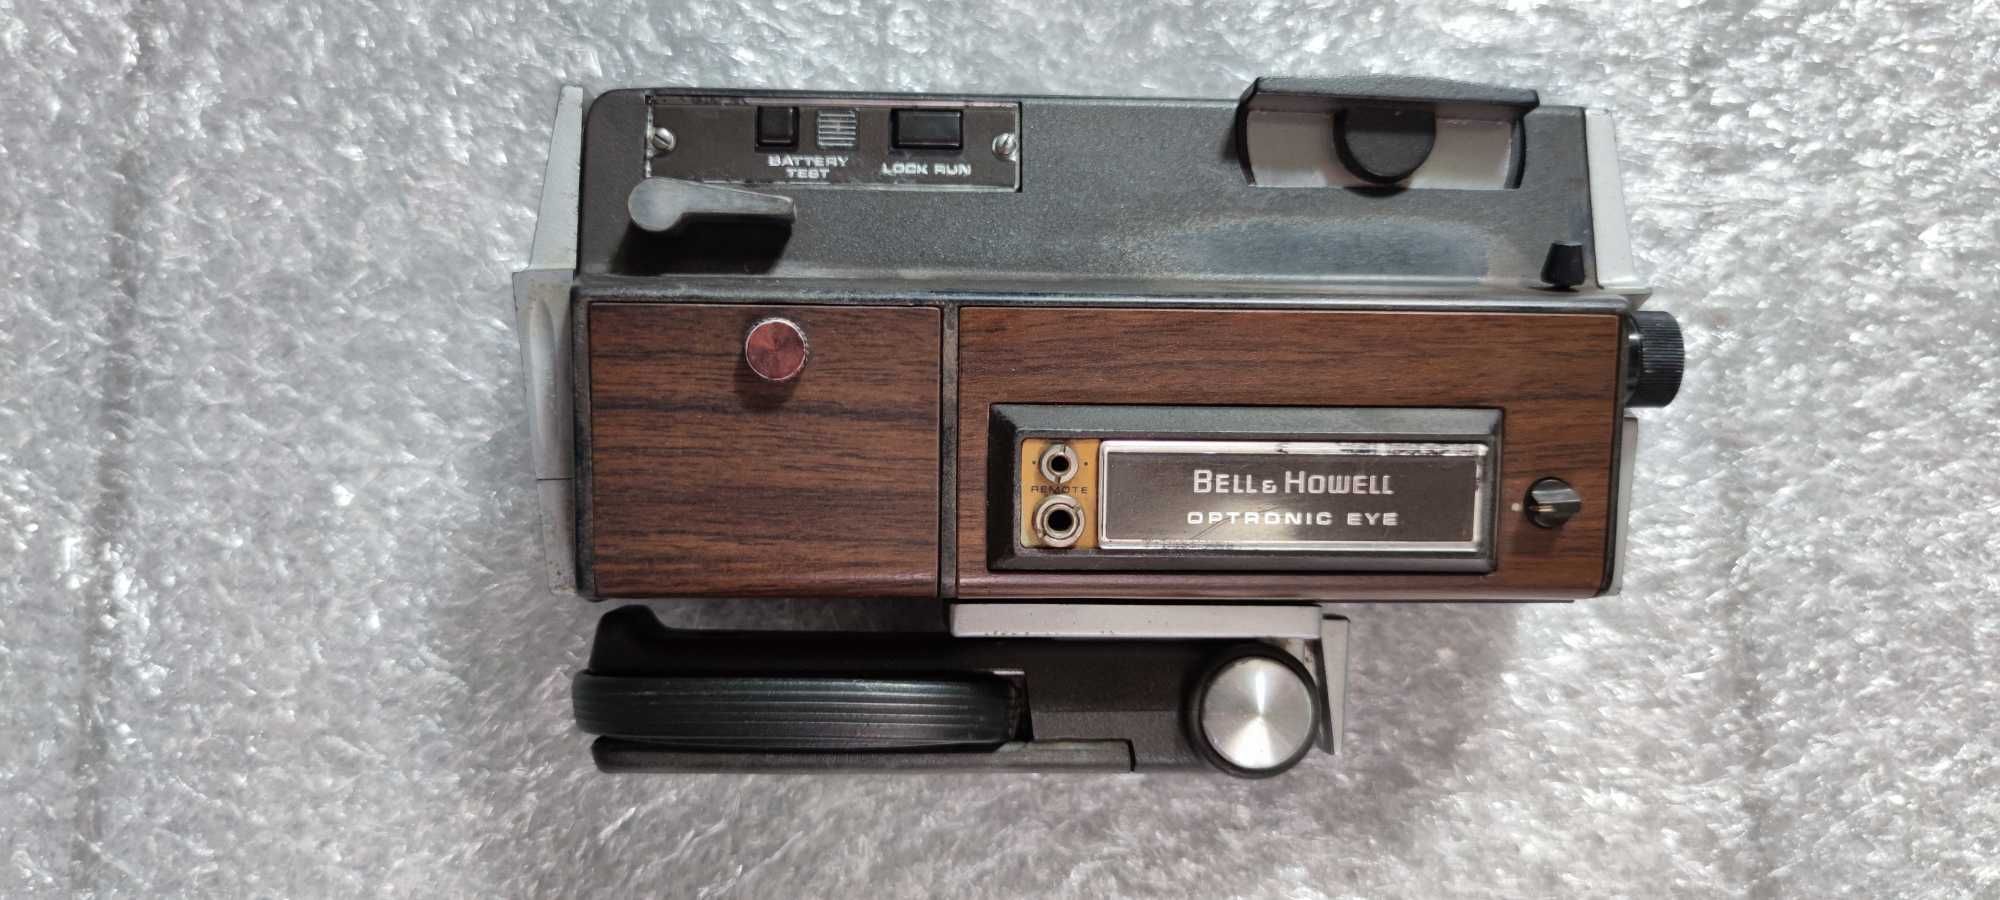 Bell & Howell Autoload Model 442 PS Optronic Eye Camera Vintage